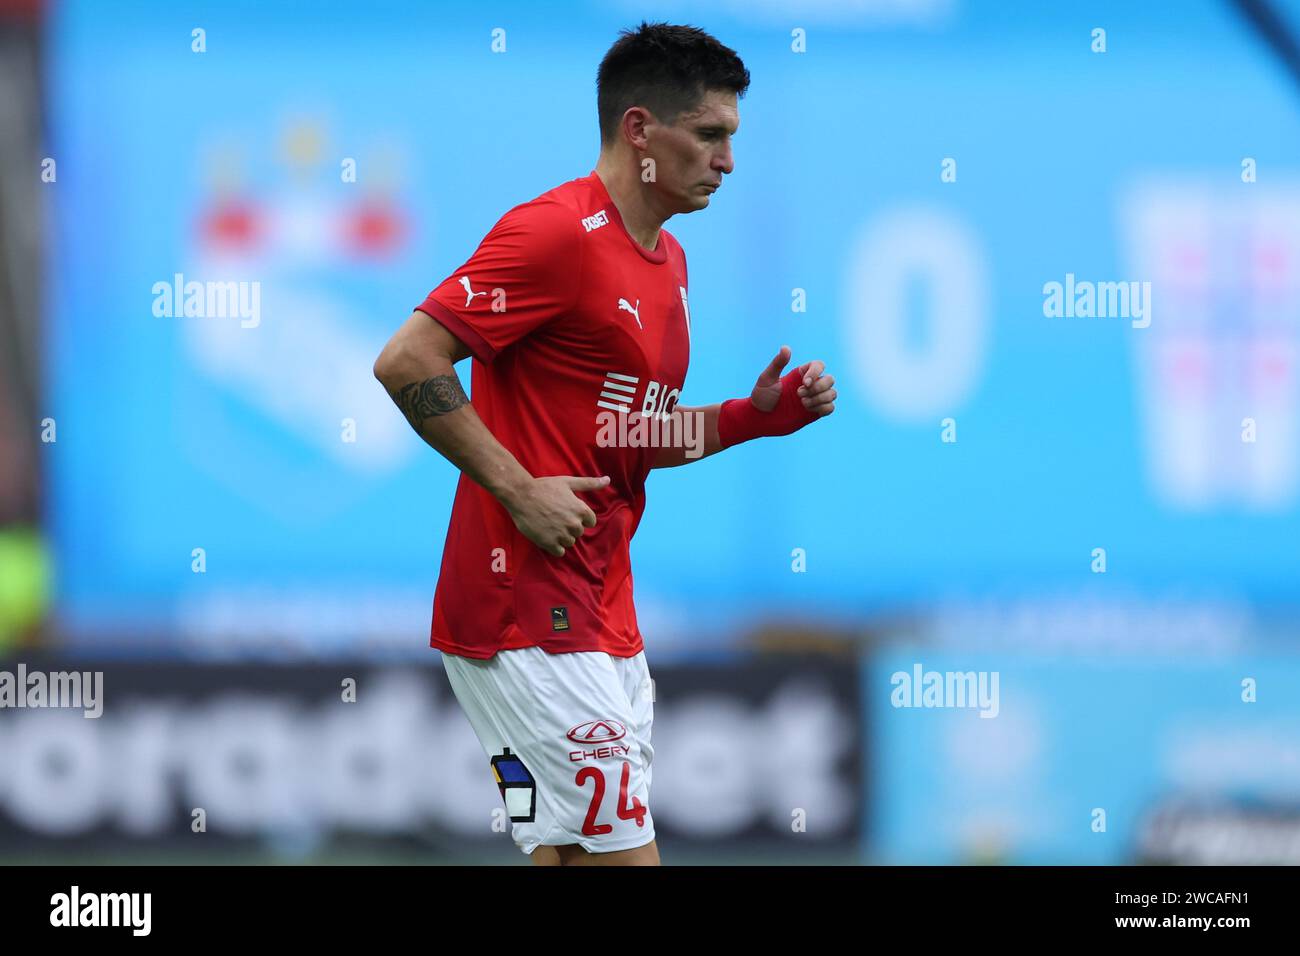 Lima, Peru. 14th Jan, 2024. Alfonso Parot of Universidad Catolica during the friendly match between Sporting Cristal and Universidad Catolica de Chile played at Nacional Stadium on January 14, 2024 in Lima, Peru. (Photo by Miguel Marrufo/PRESSINPHOTO) Credit: PRESSINPHOTO SPORTS AGENCY/Alamy Live News Stock Photo